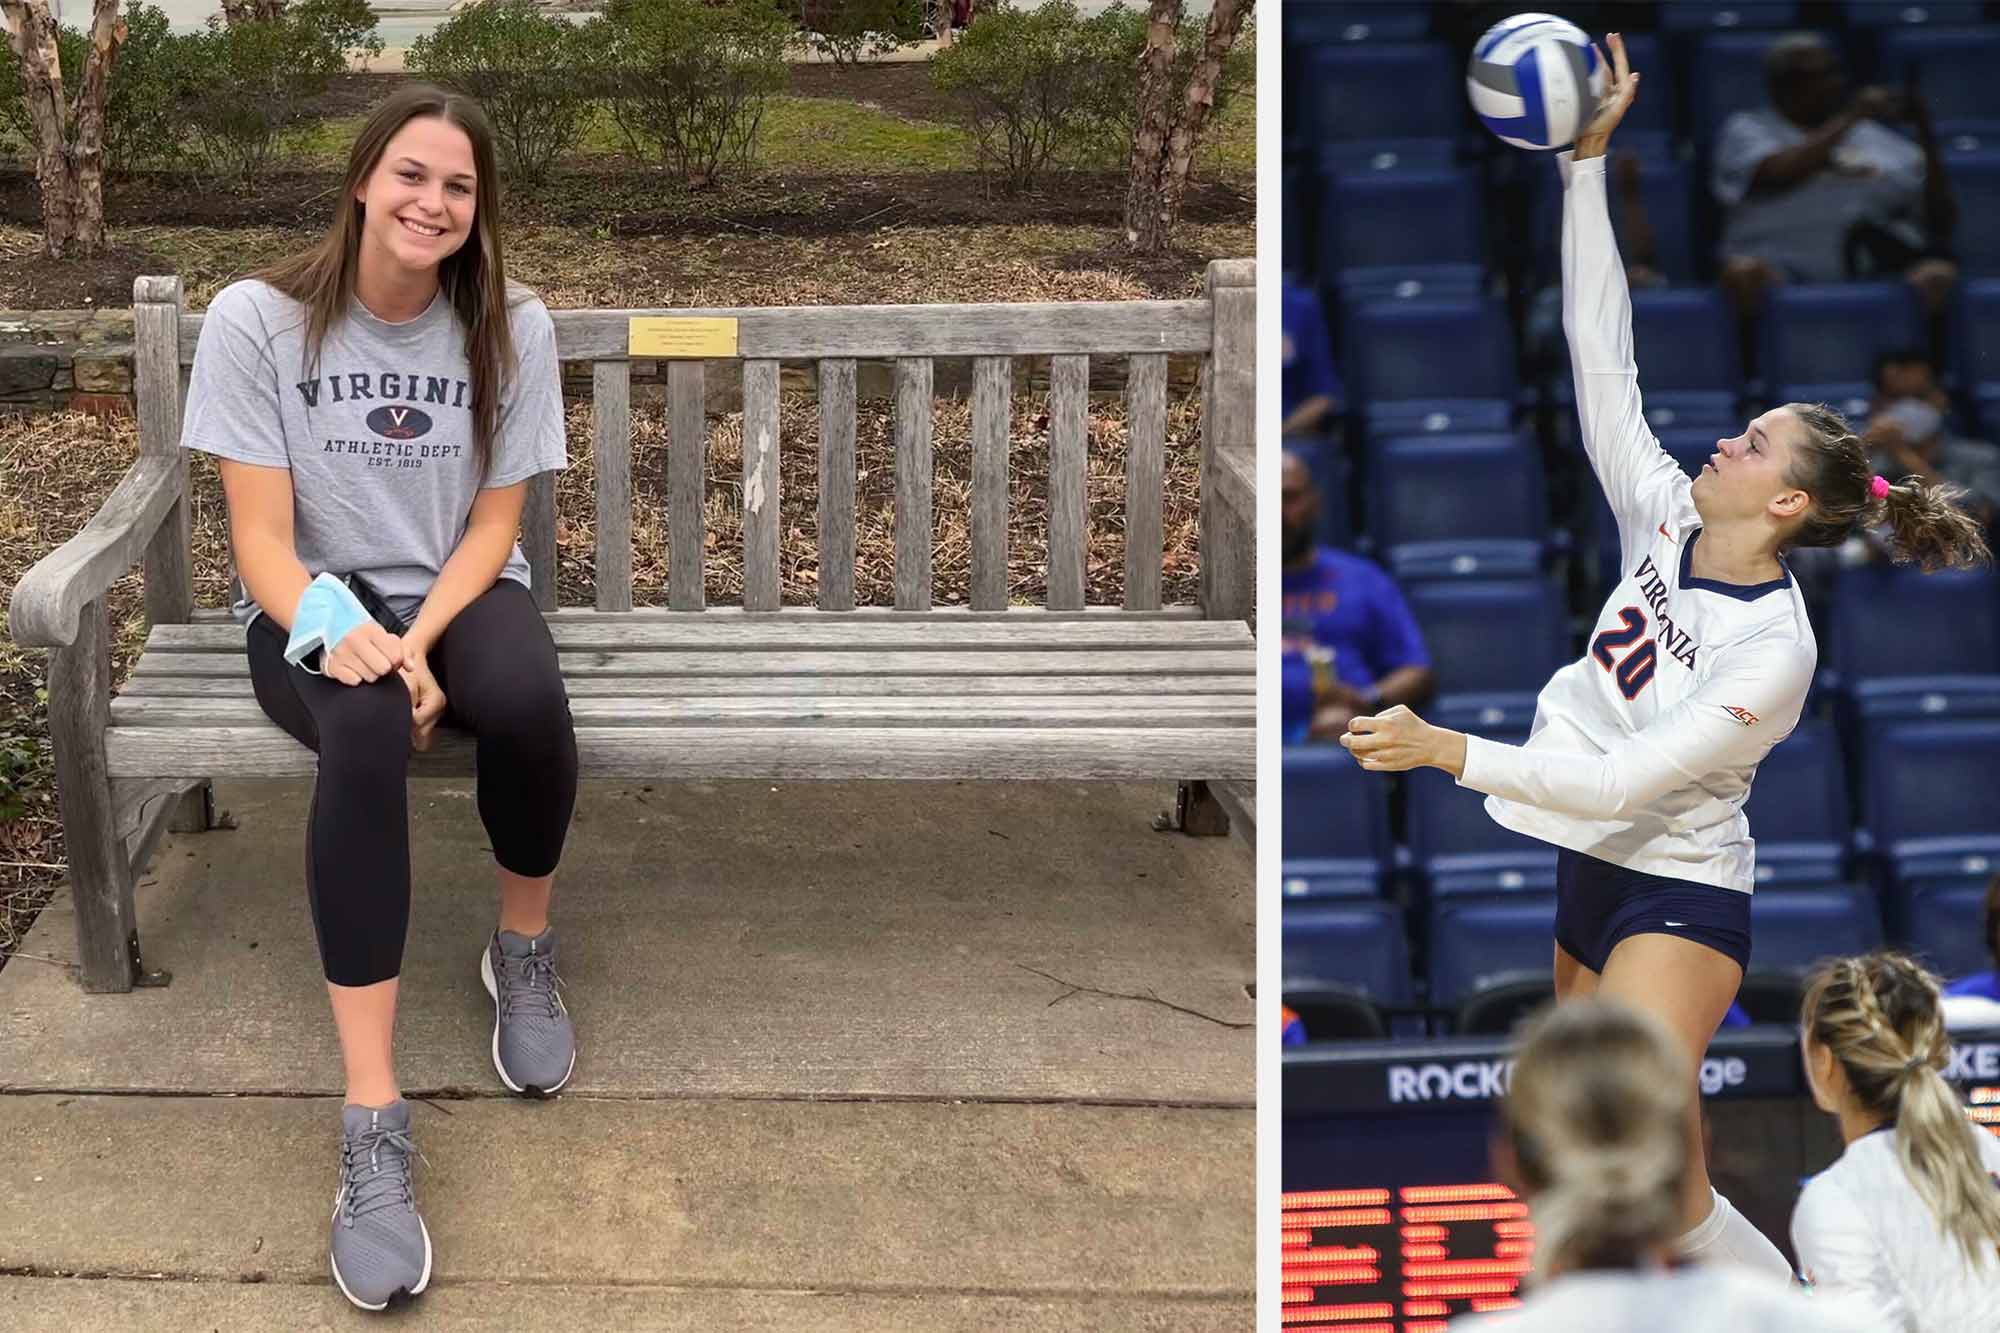 Left: Chloe Wilson sitting on a bench. Right: Chloe Wilson spiking a volleyball during a game.